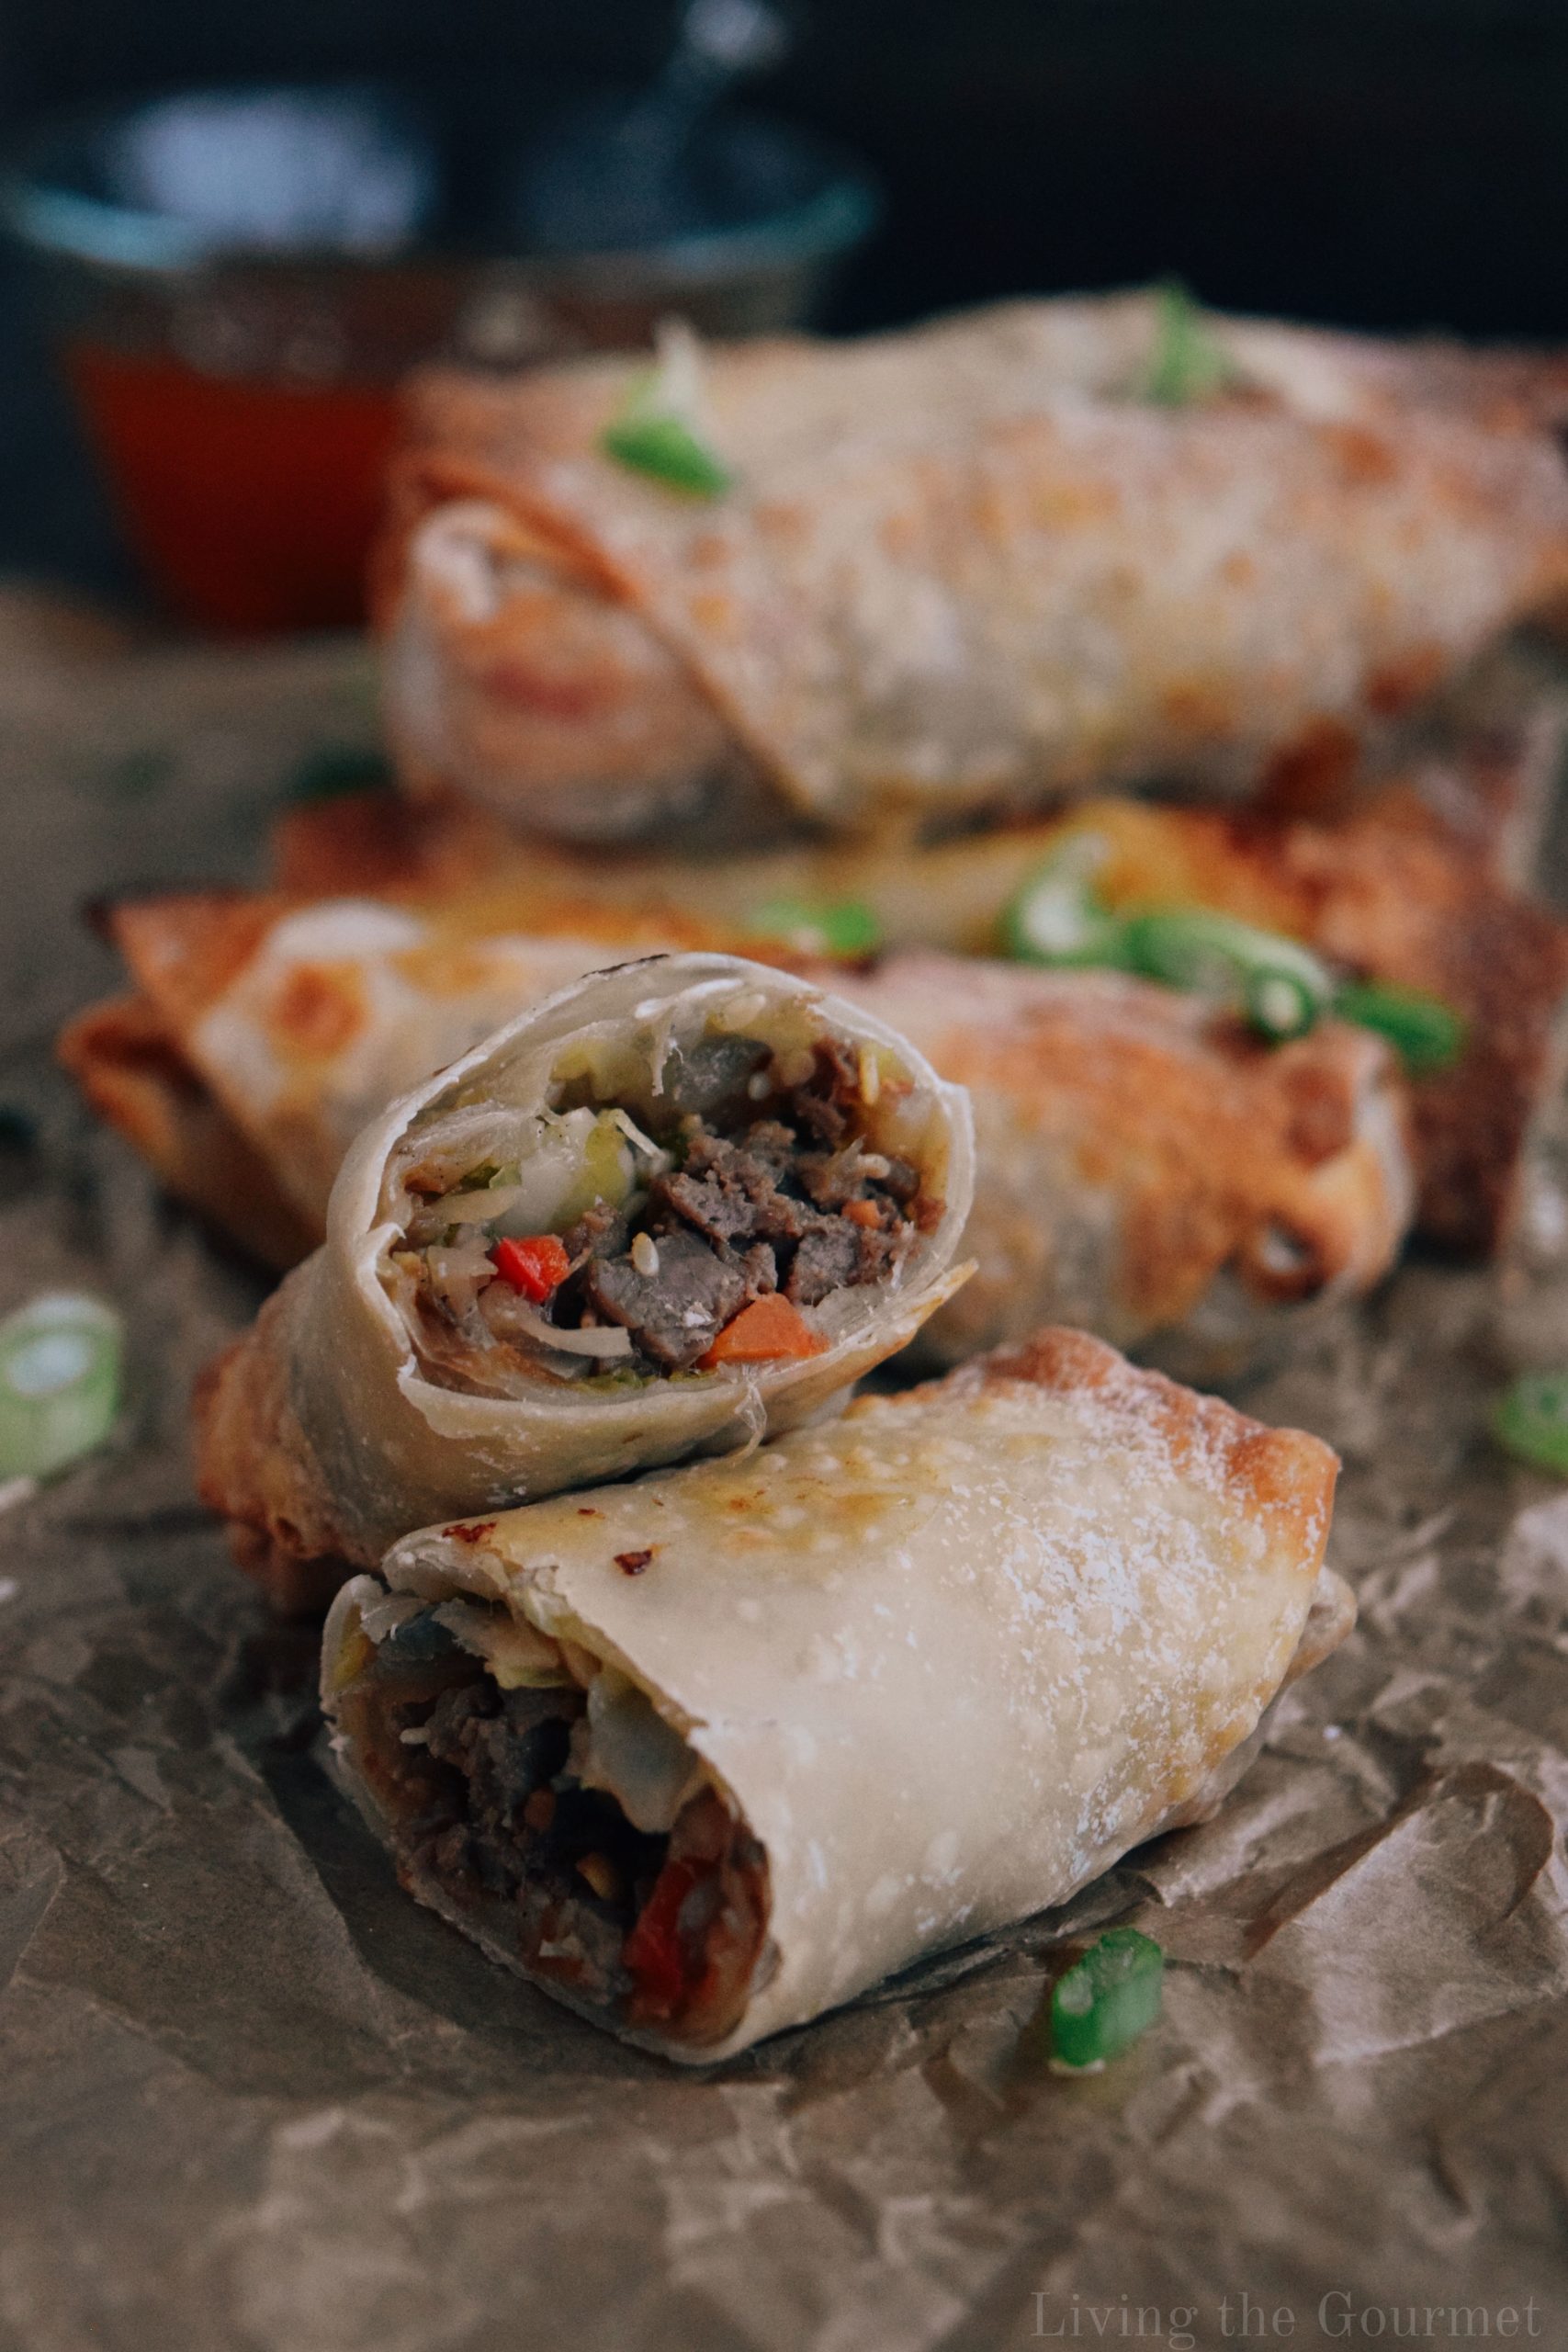 Egg Roll Wrappers — Melissas Produce